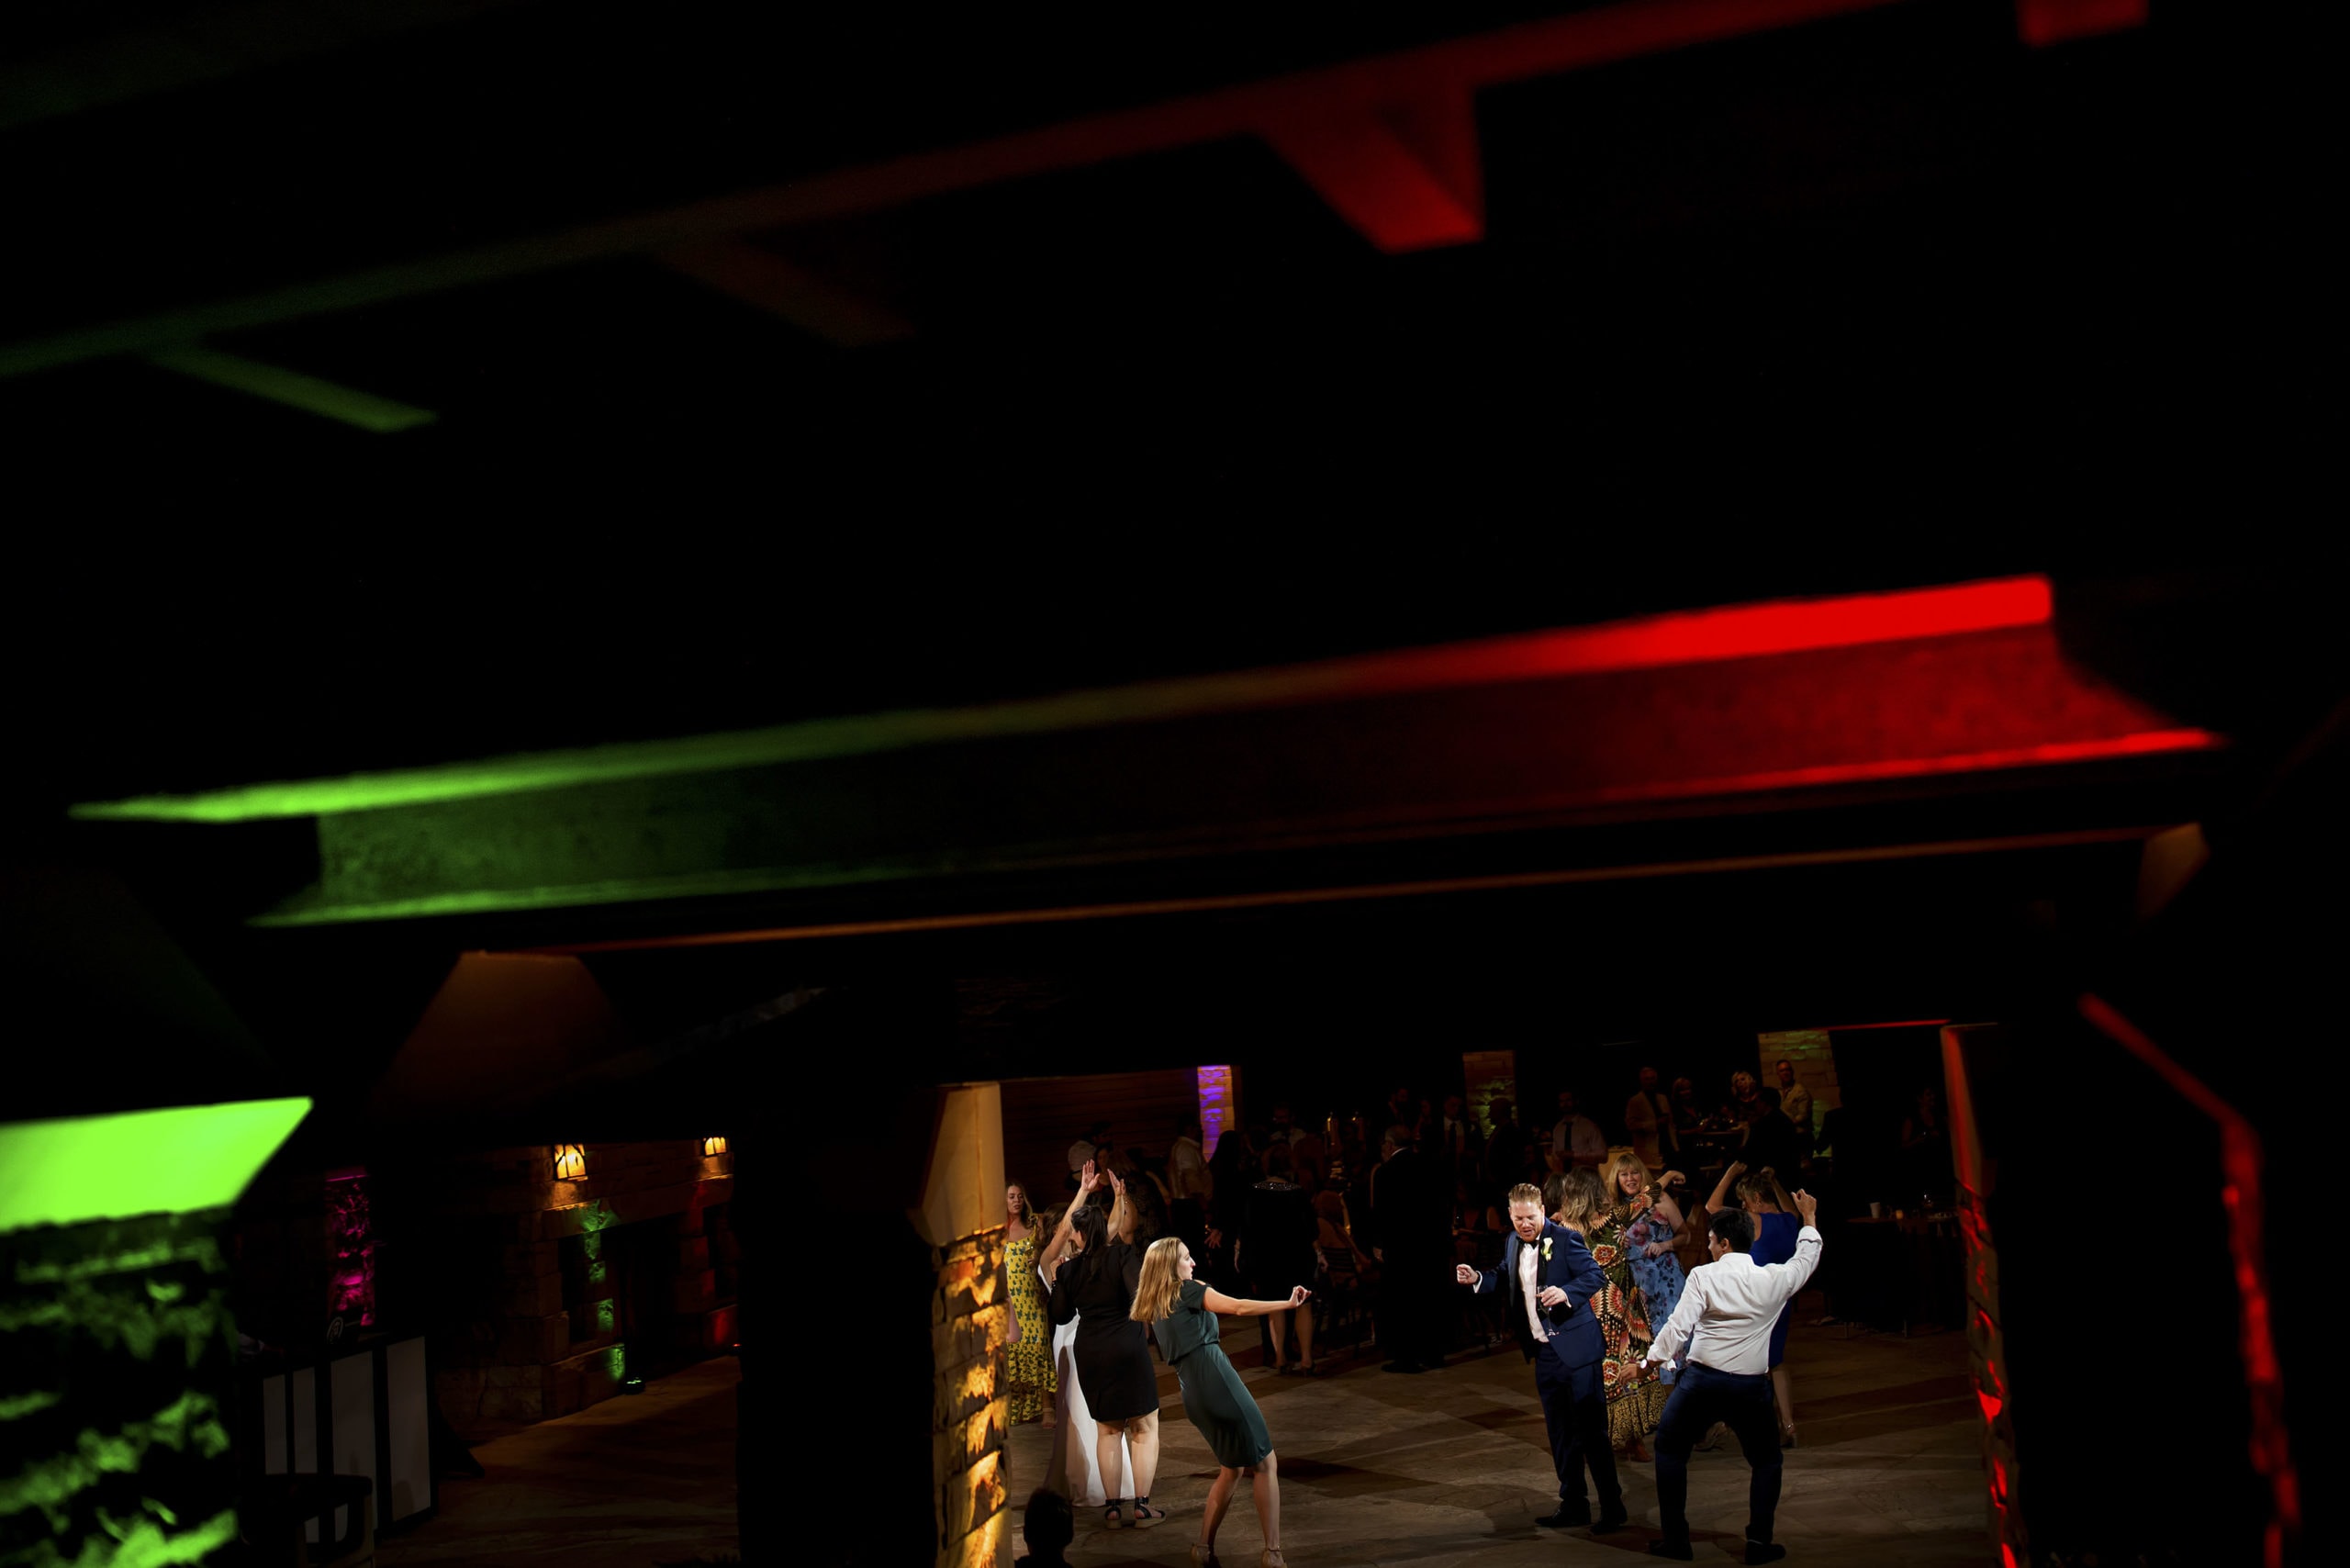 Guests dance during a wedding reception at Sanctuary